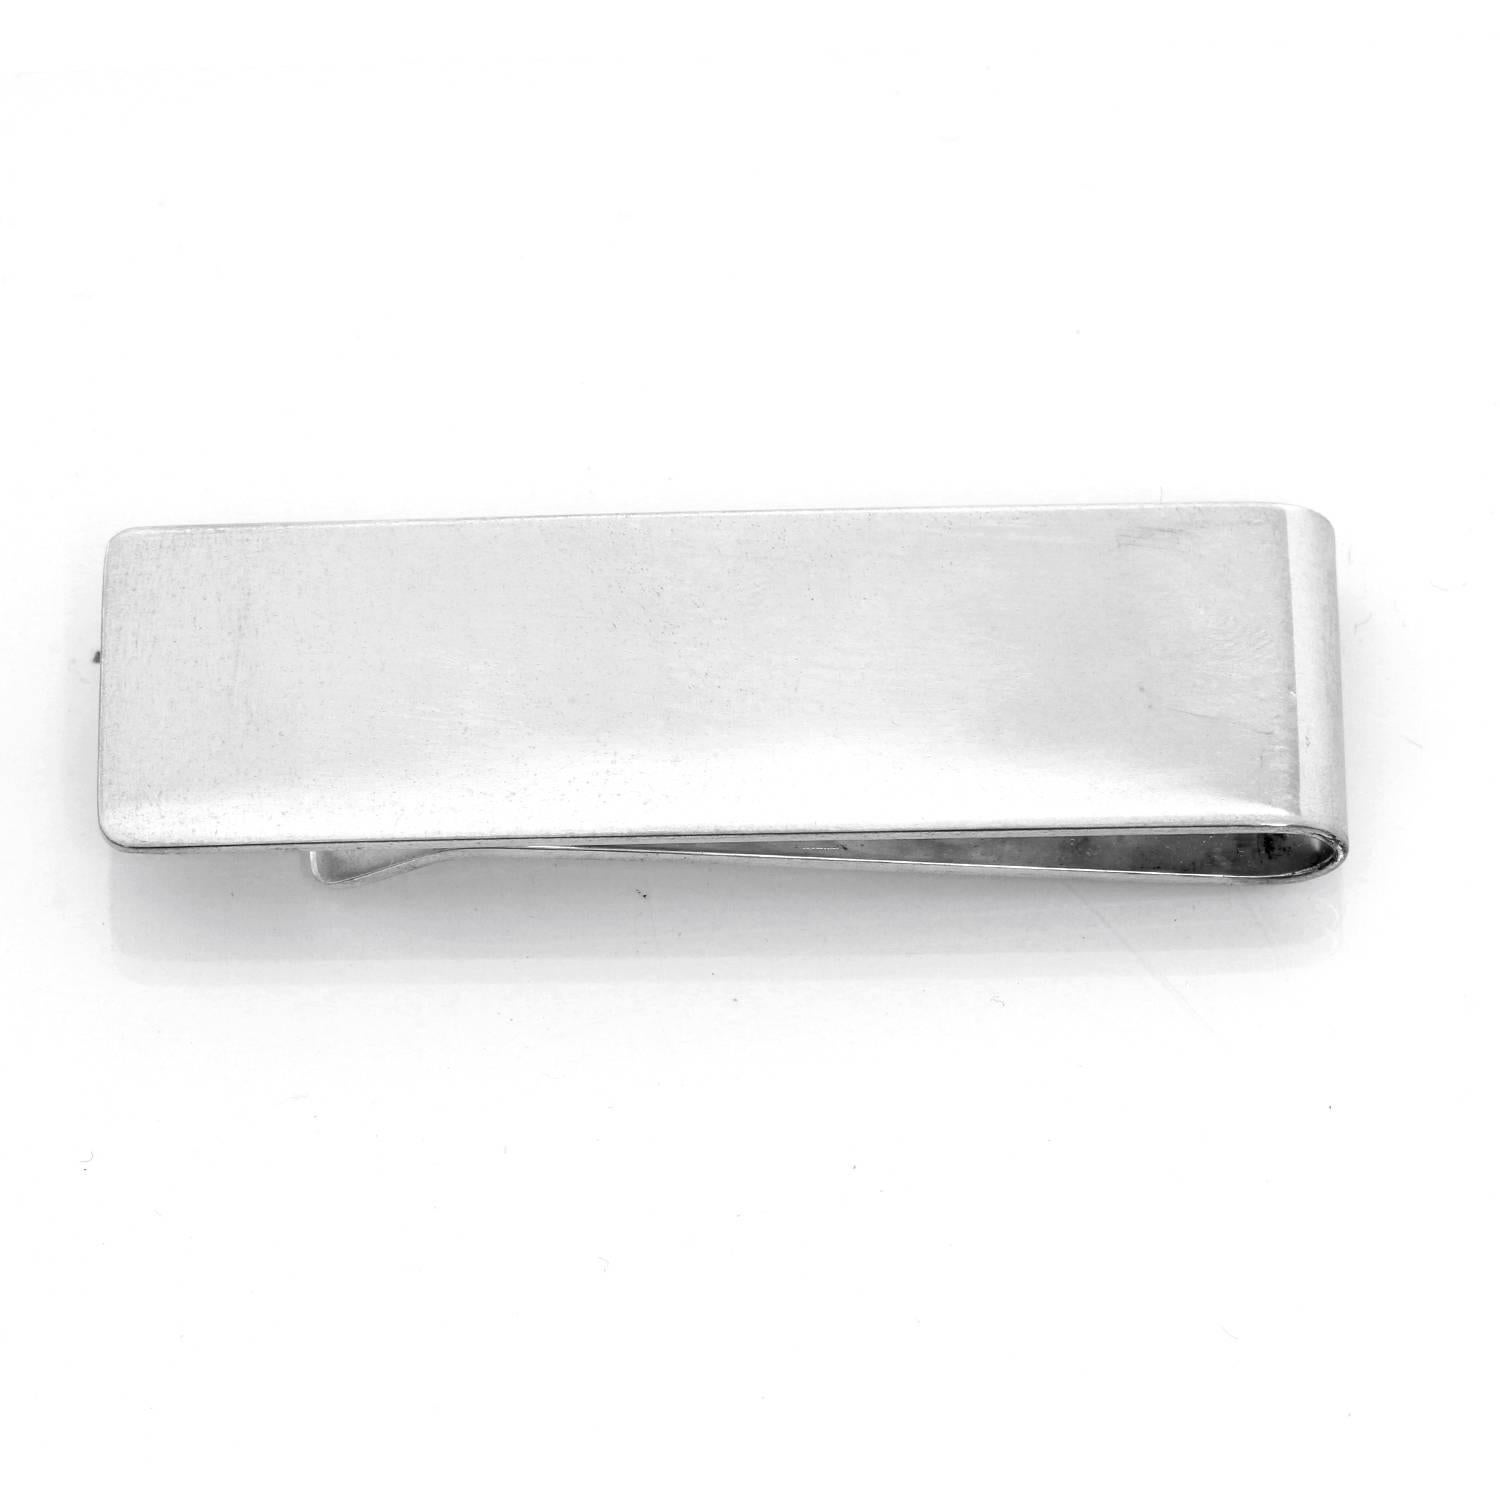 Tiffany & Co. Sterling Silver Money Clip  - Sterling Silver inscribed with Tiffany & Co. 925. 2.5 inches long. Total weight 19.6 grams .